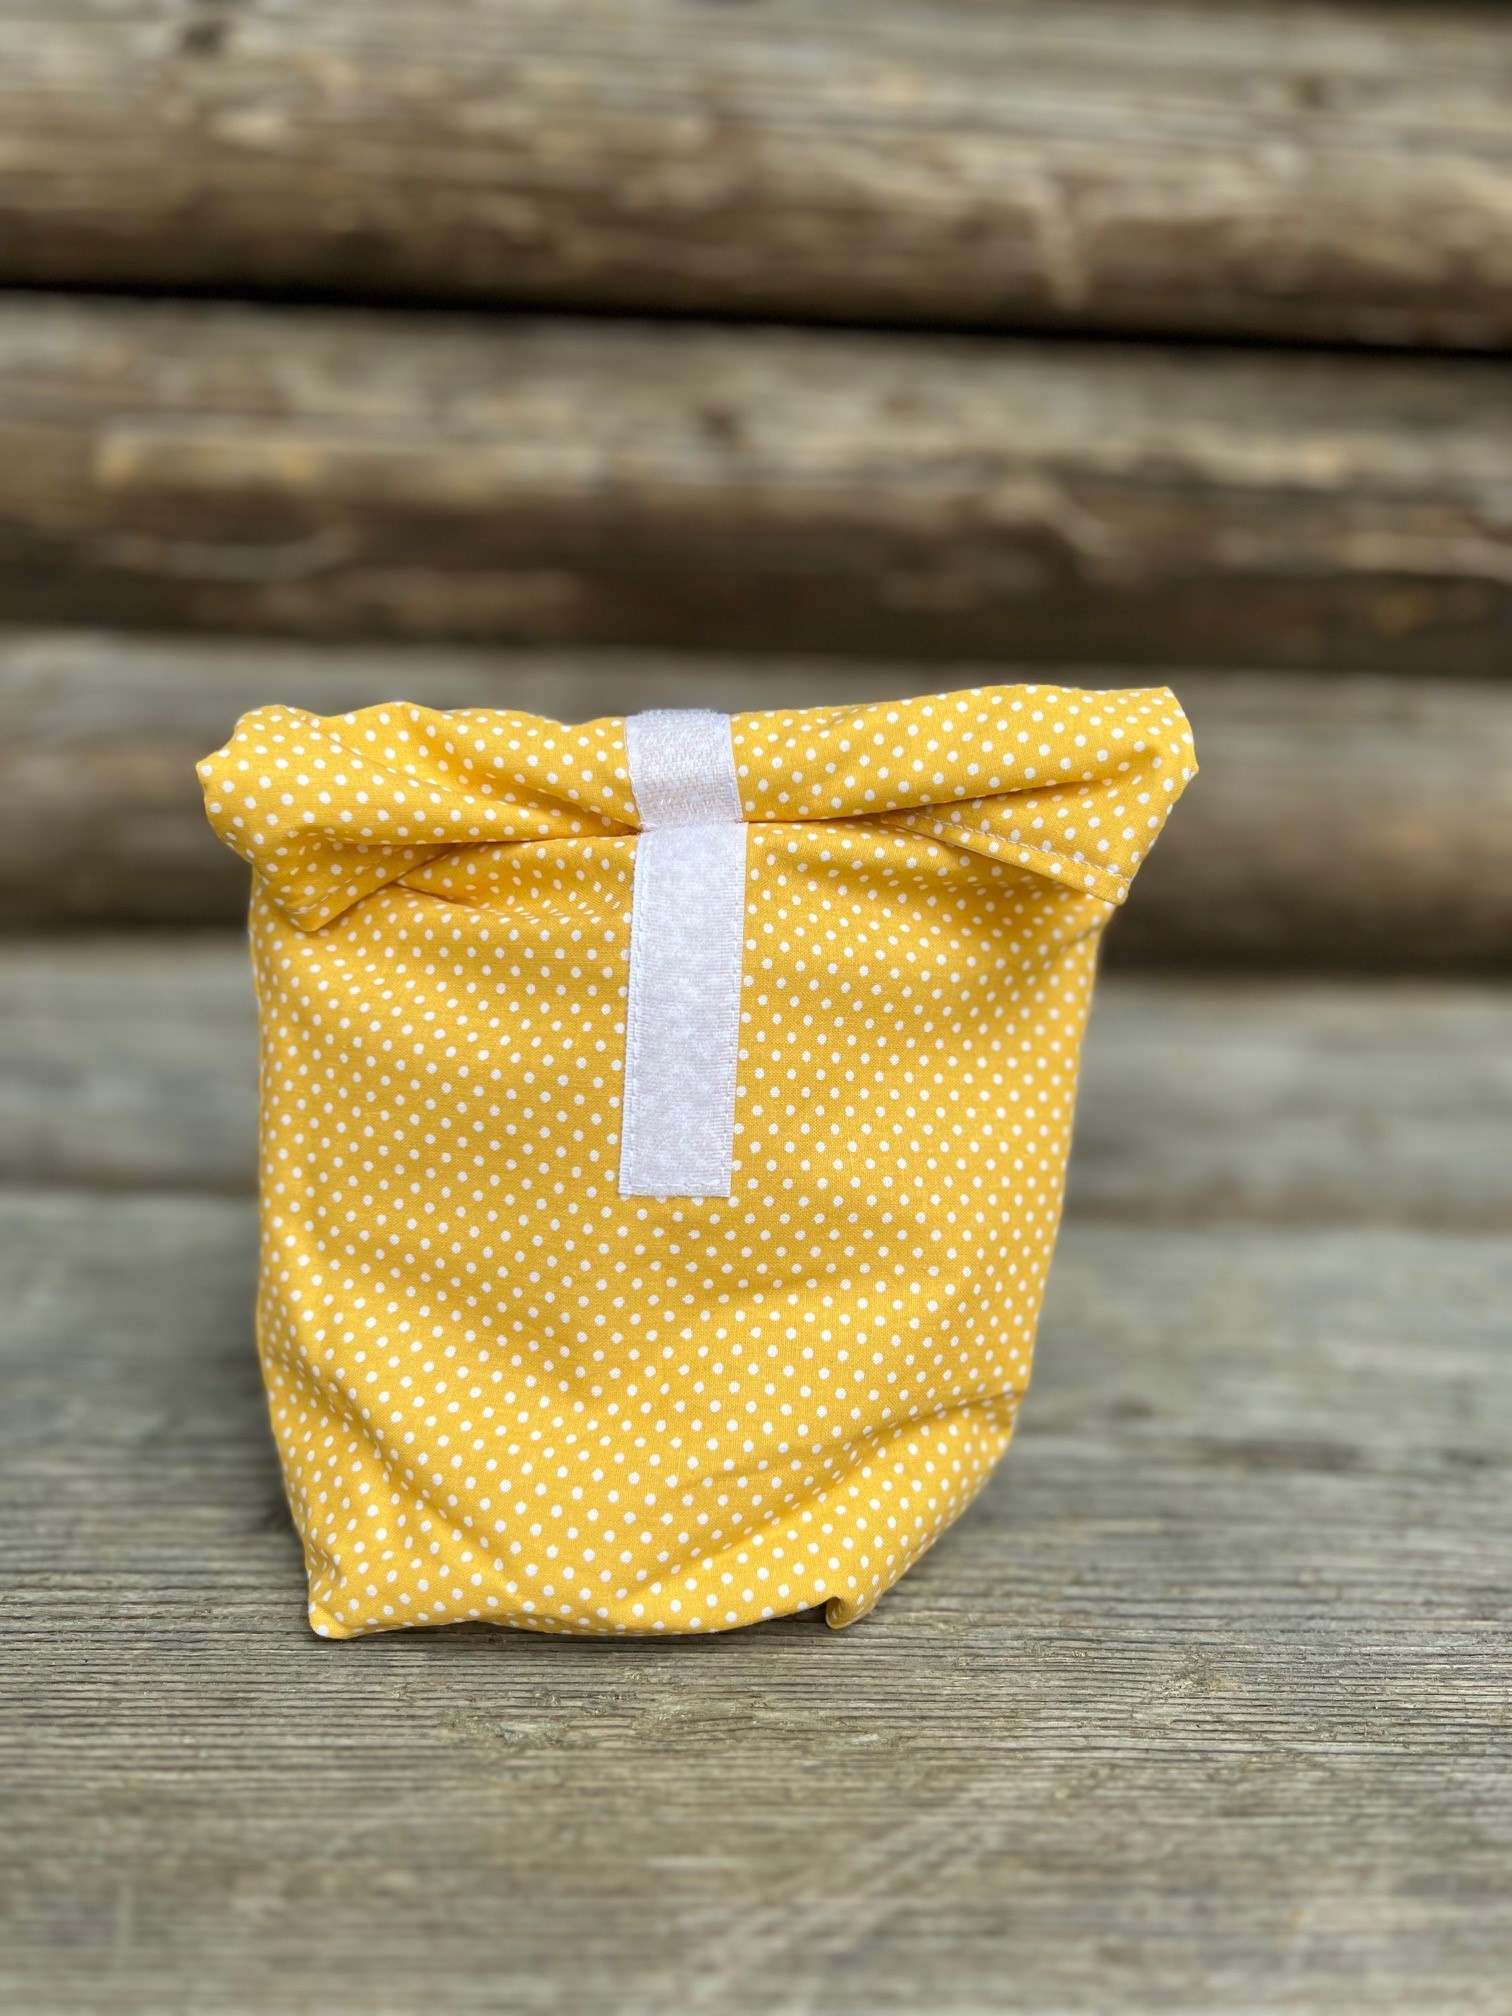 Lunch bag yellow coloured - upcycled!